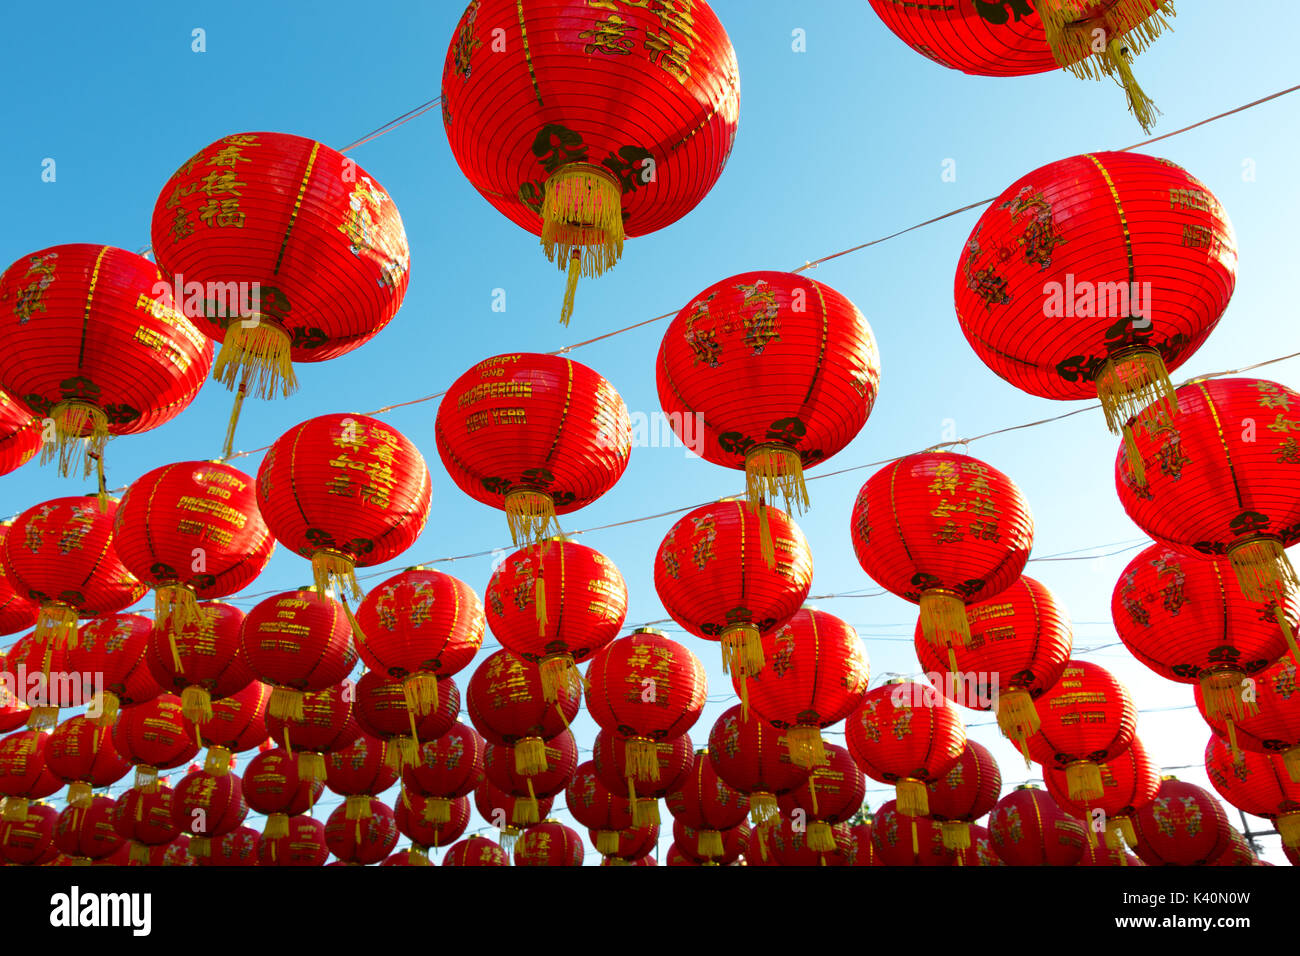 Chinese lanterns hanging on a clear blue sky Stock Photo